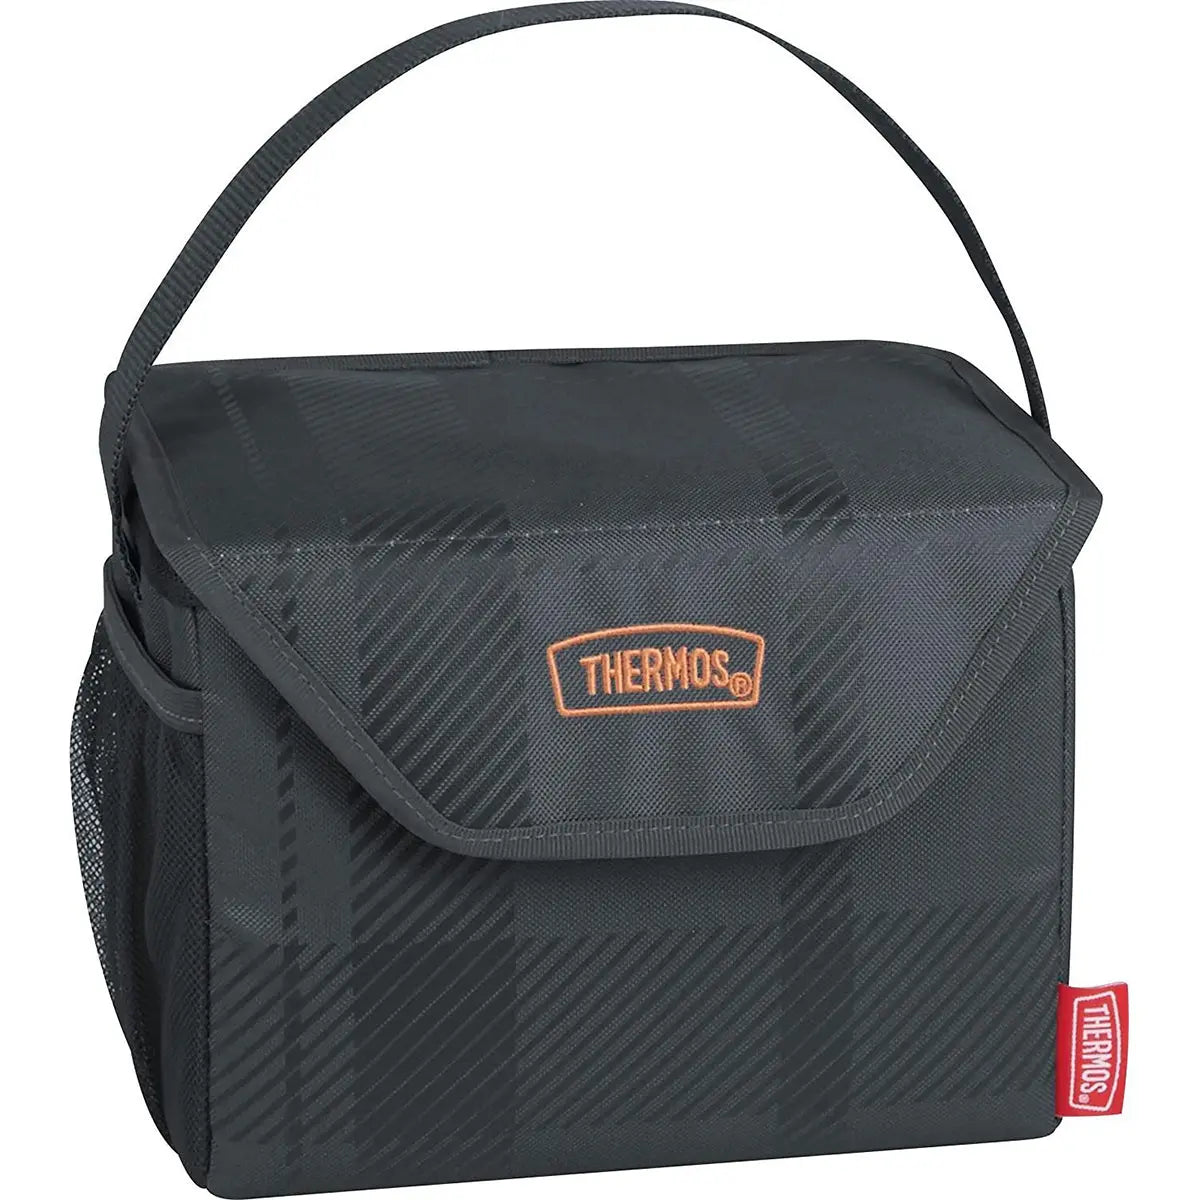 Thermos 24-Can Soft Cooler - Charcoal Plaid Thermos